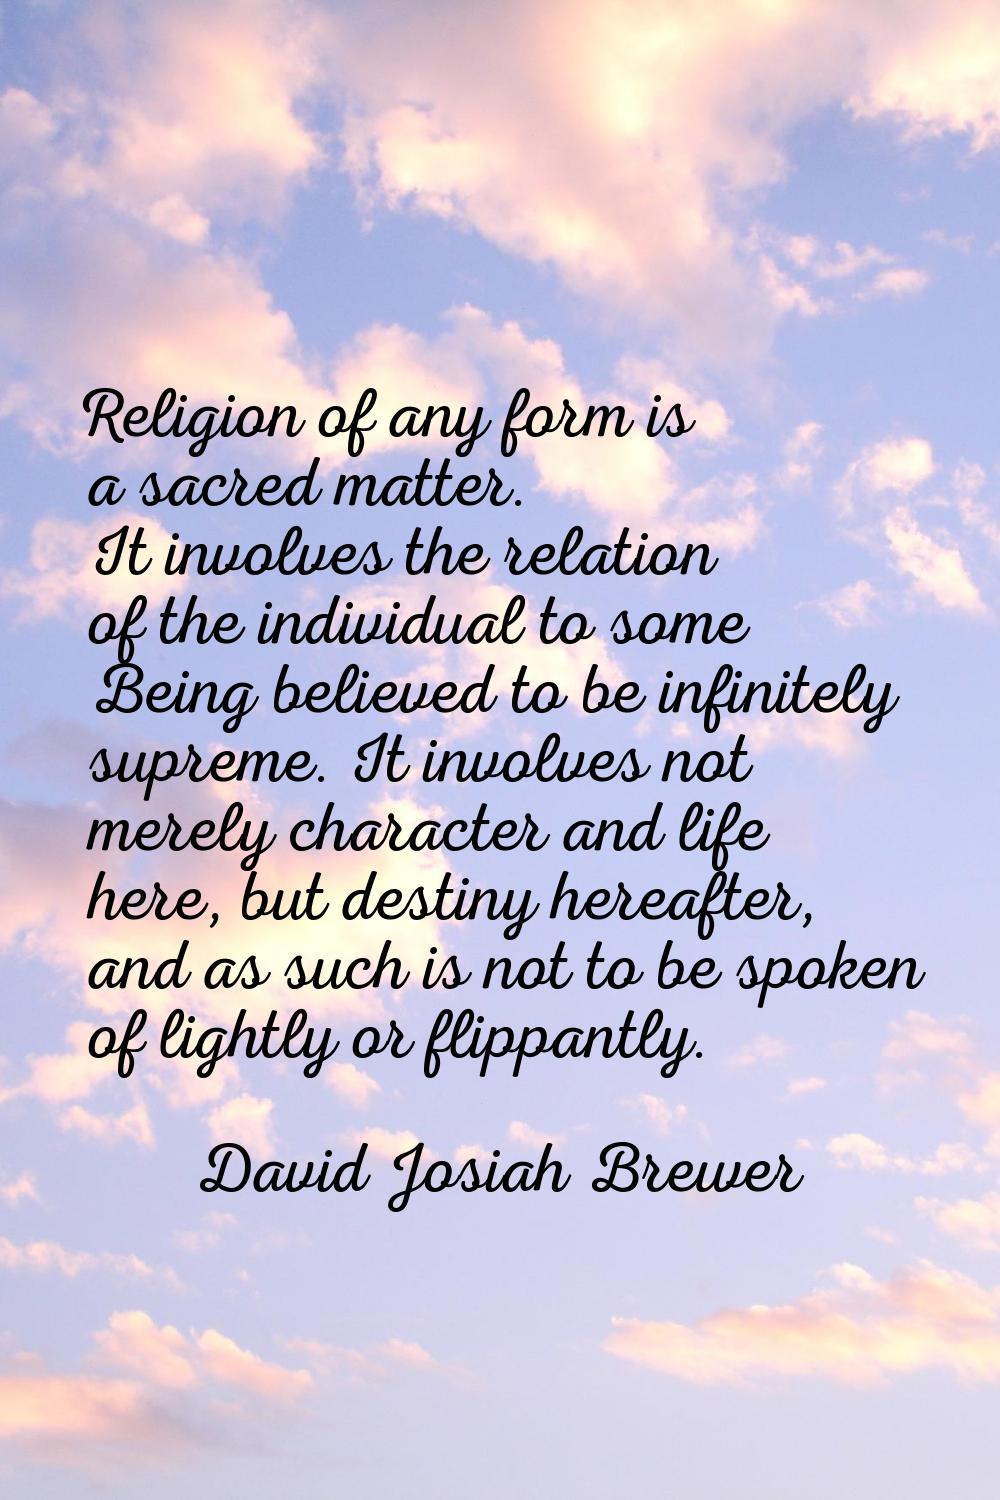 Religion of any form is a sacred matter. It involves the relation of the individual to some Being b